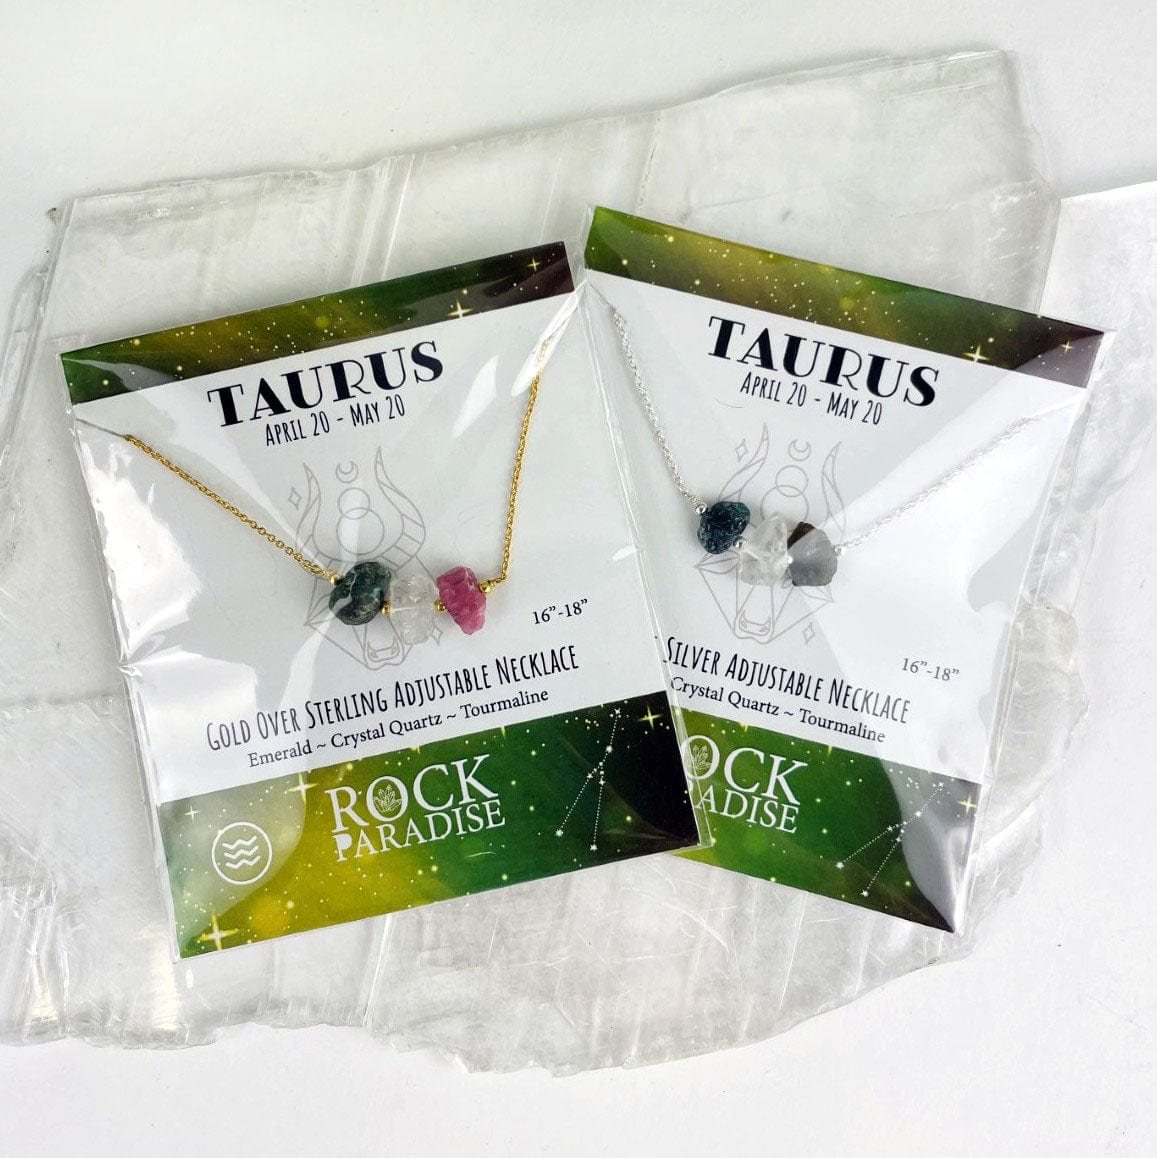 Taurus Necklace - 3 Stones for your Zodiac Sign  - Gold over Sterling or Sterling Silver Adjustable Length in packaging